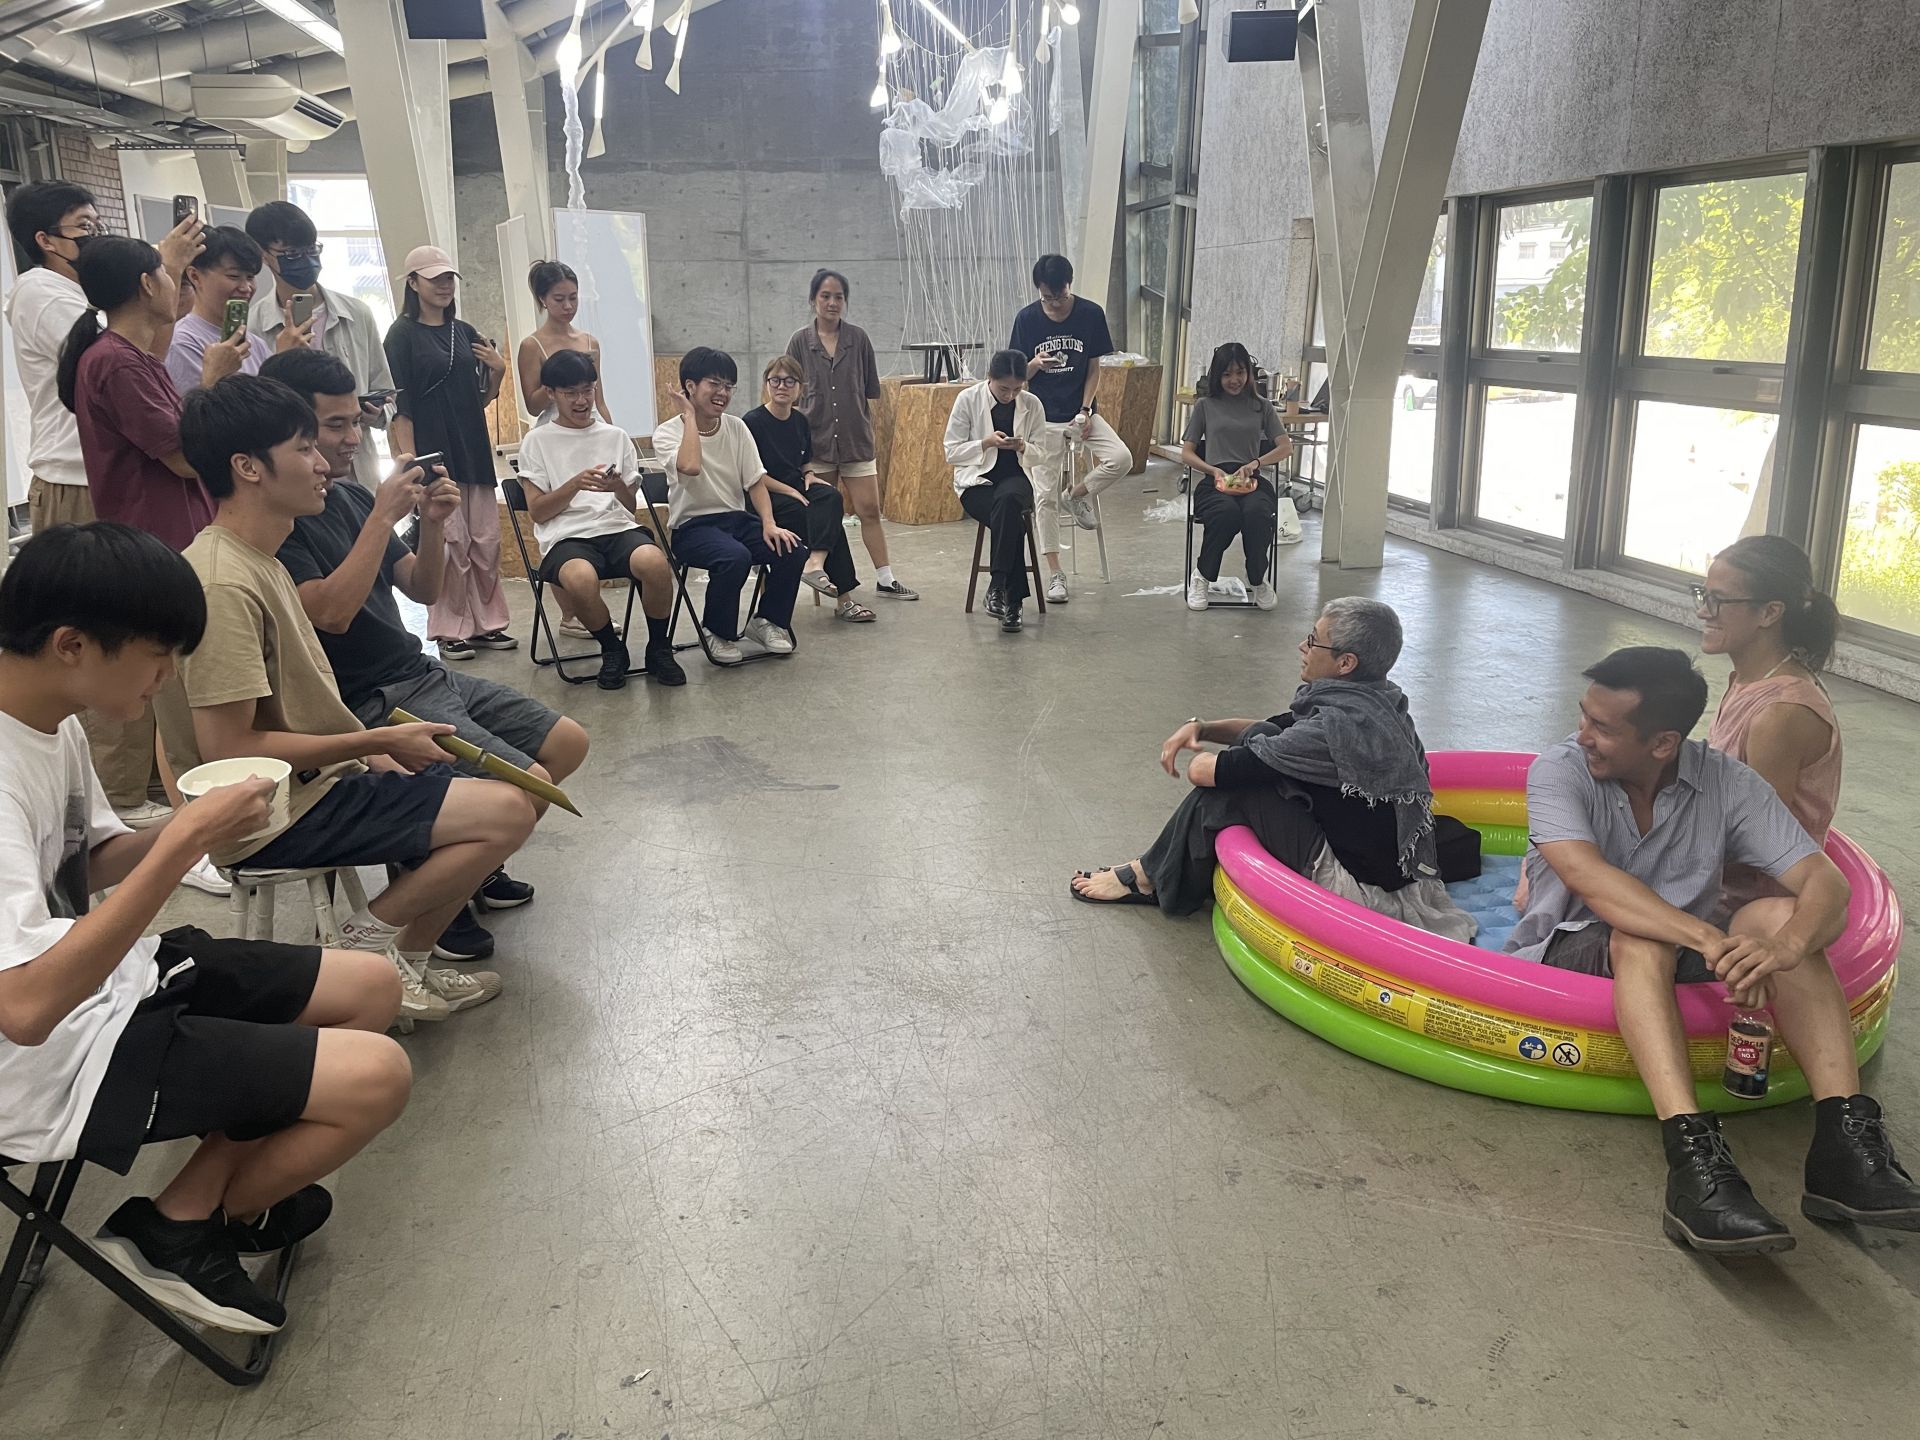 NCKU, Tunghai University, and the Architectural Association hosted "AA Visiting School Taiwan - Urbanity from the Ocean".